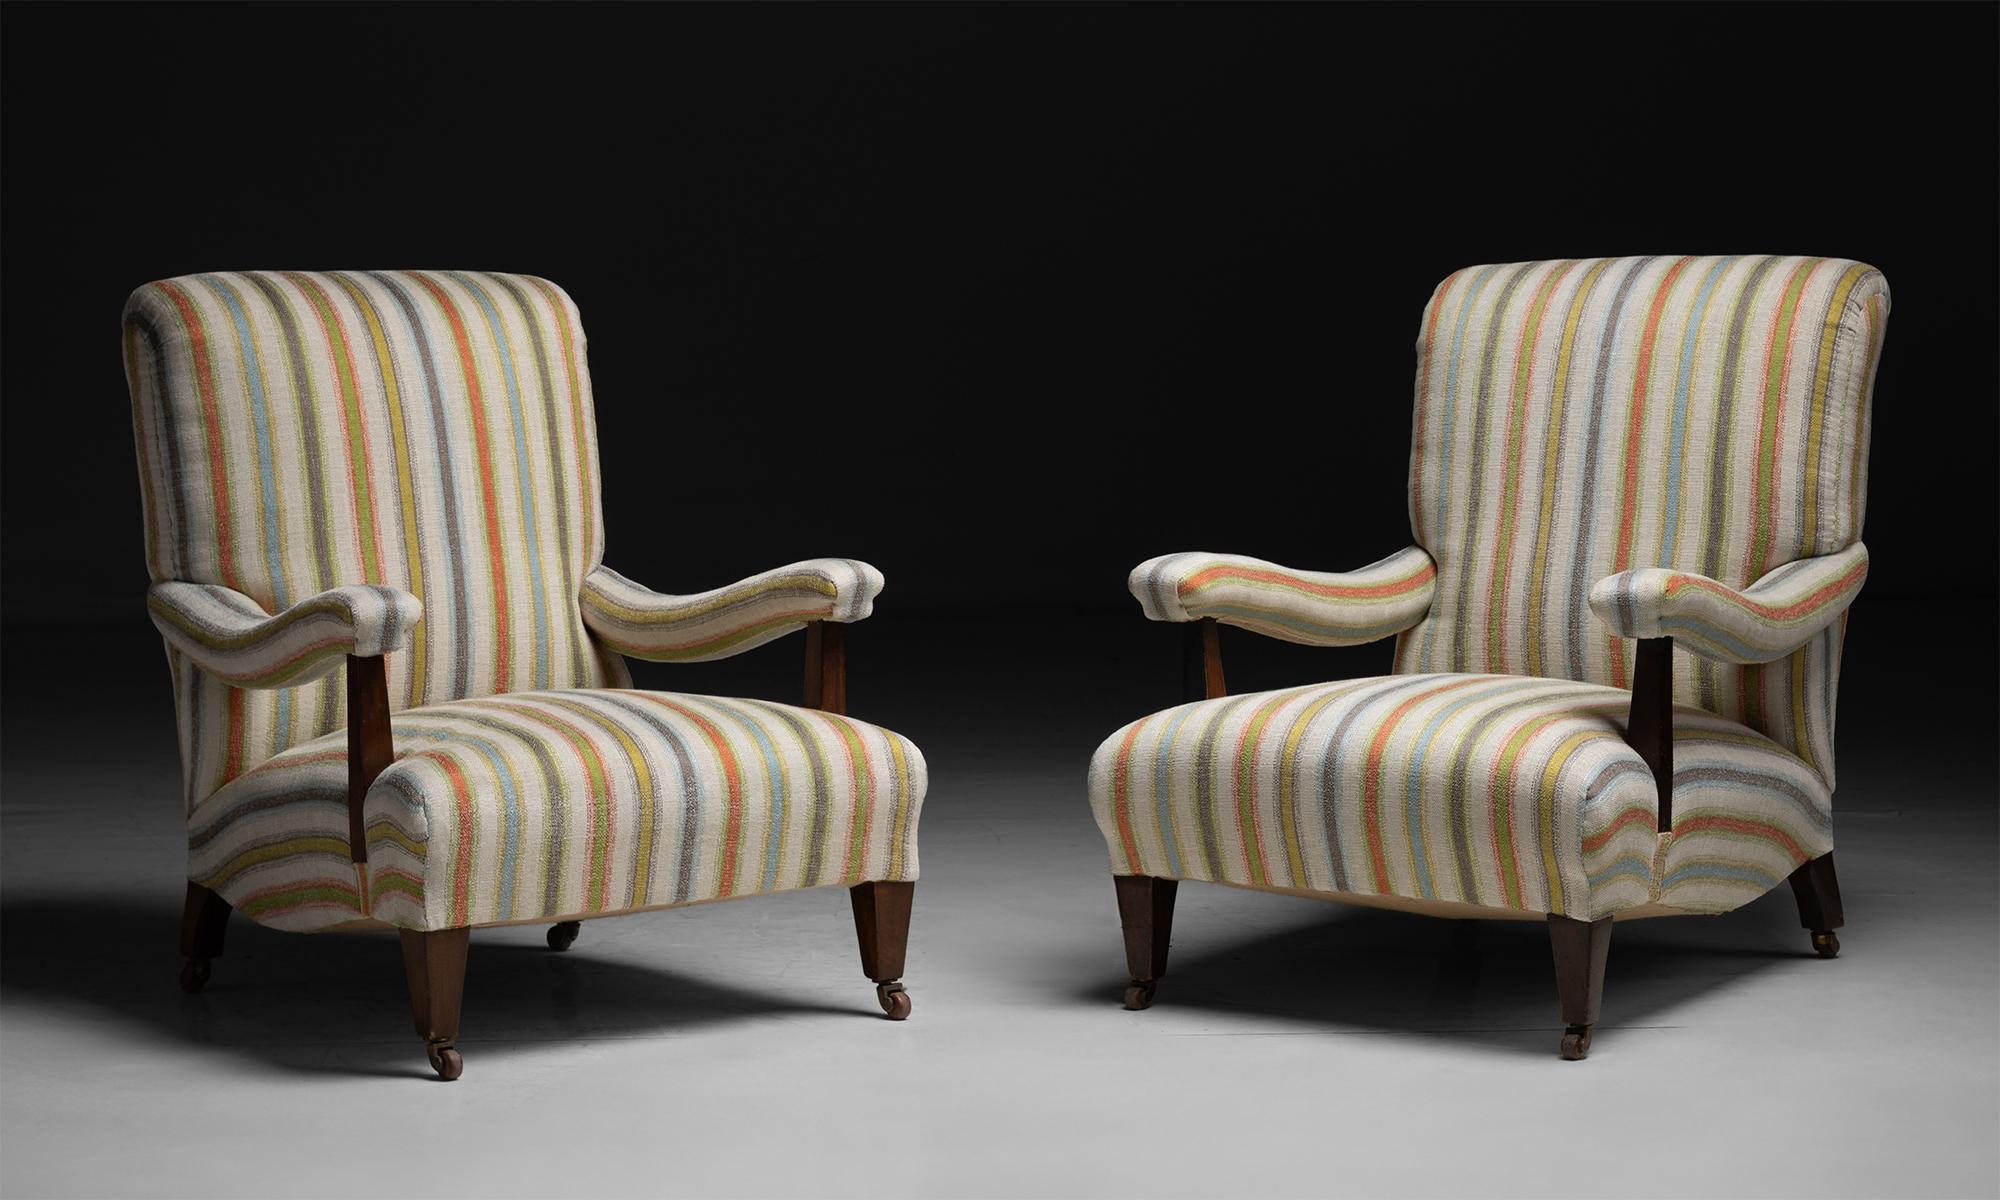 England circa 1900
Antique frames, newly upholstered in striped cotton blend by Pierre Frey.
30